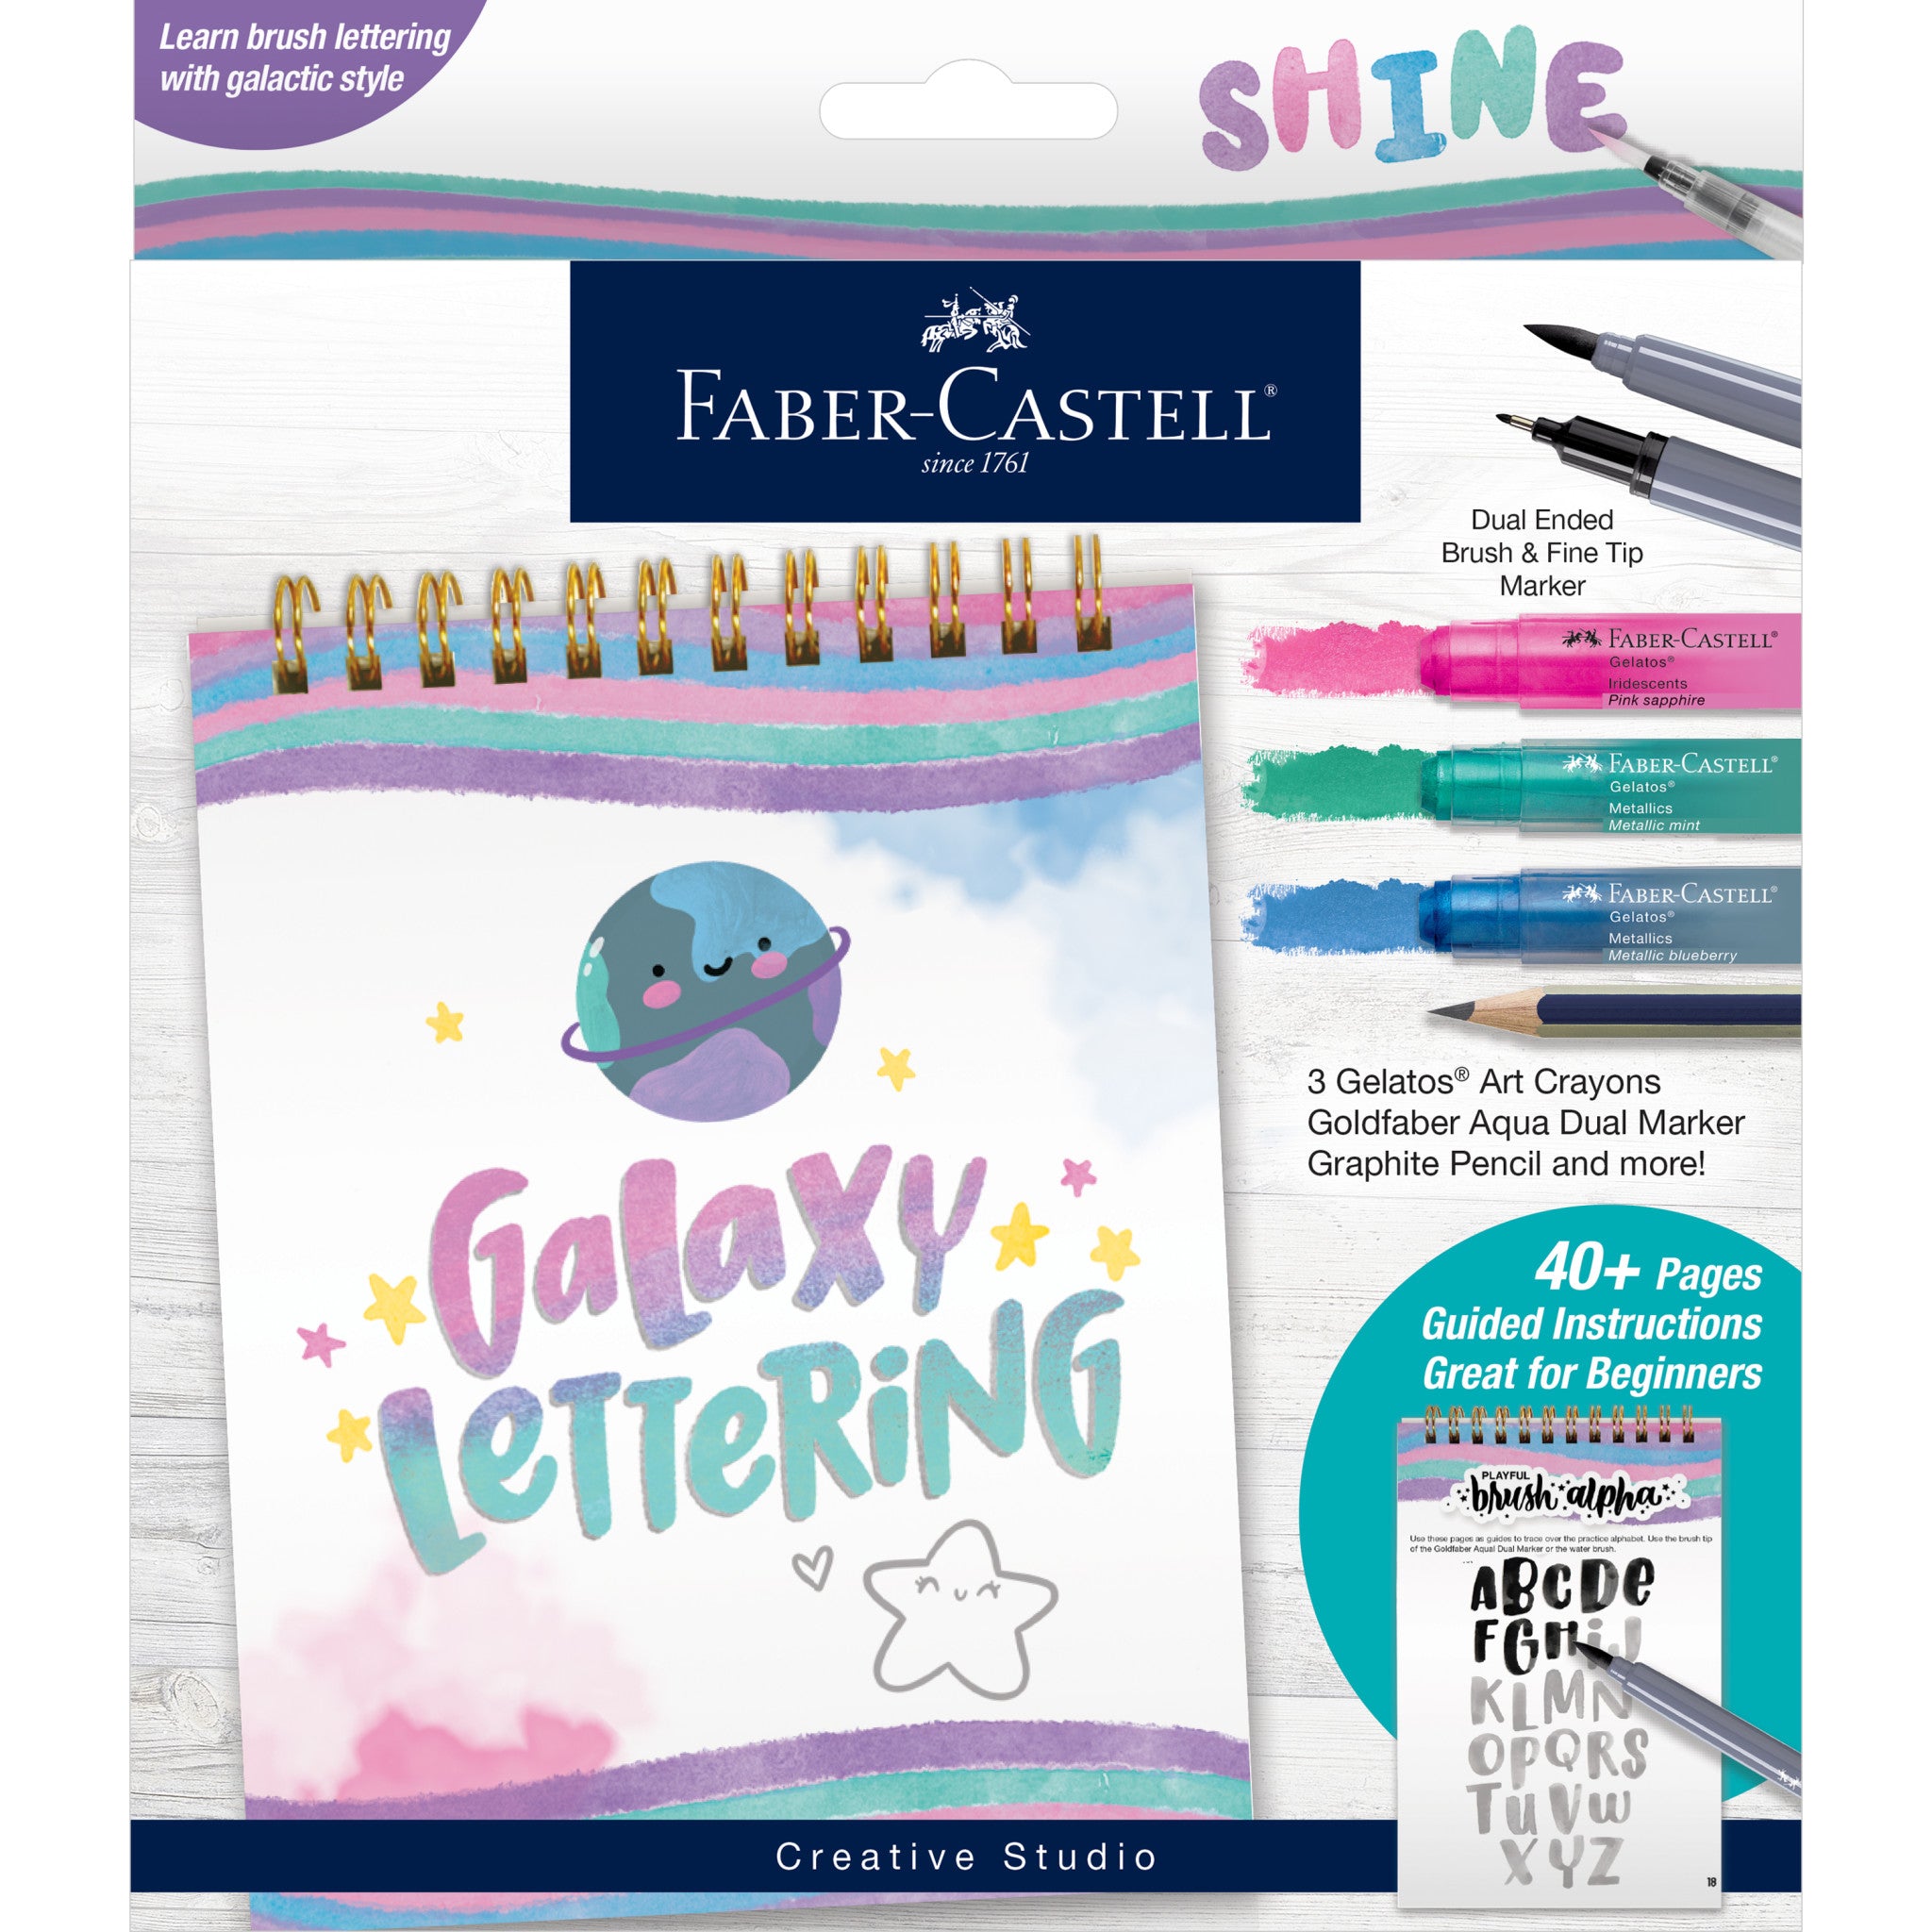 Galaxy Lettering Kit  Faber-Castell – Faber-Castell USA